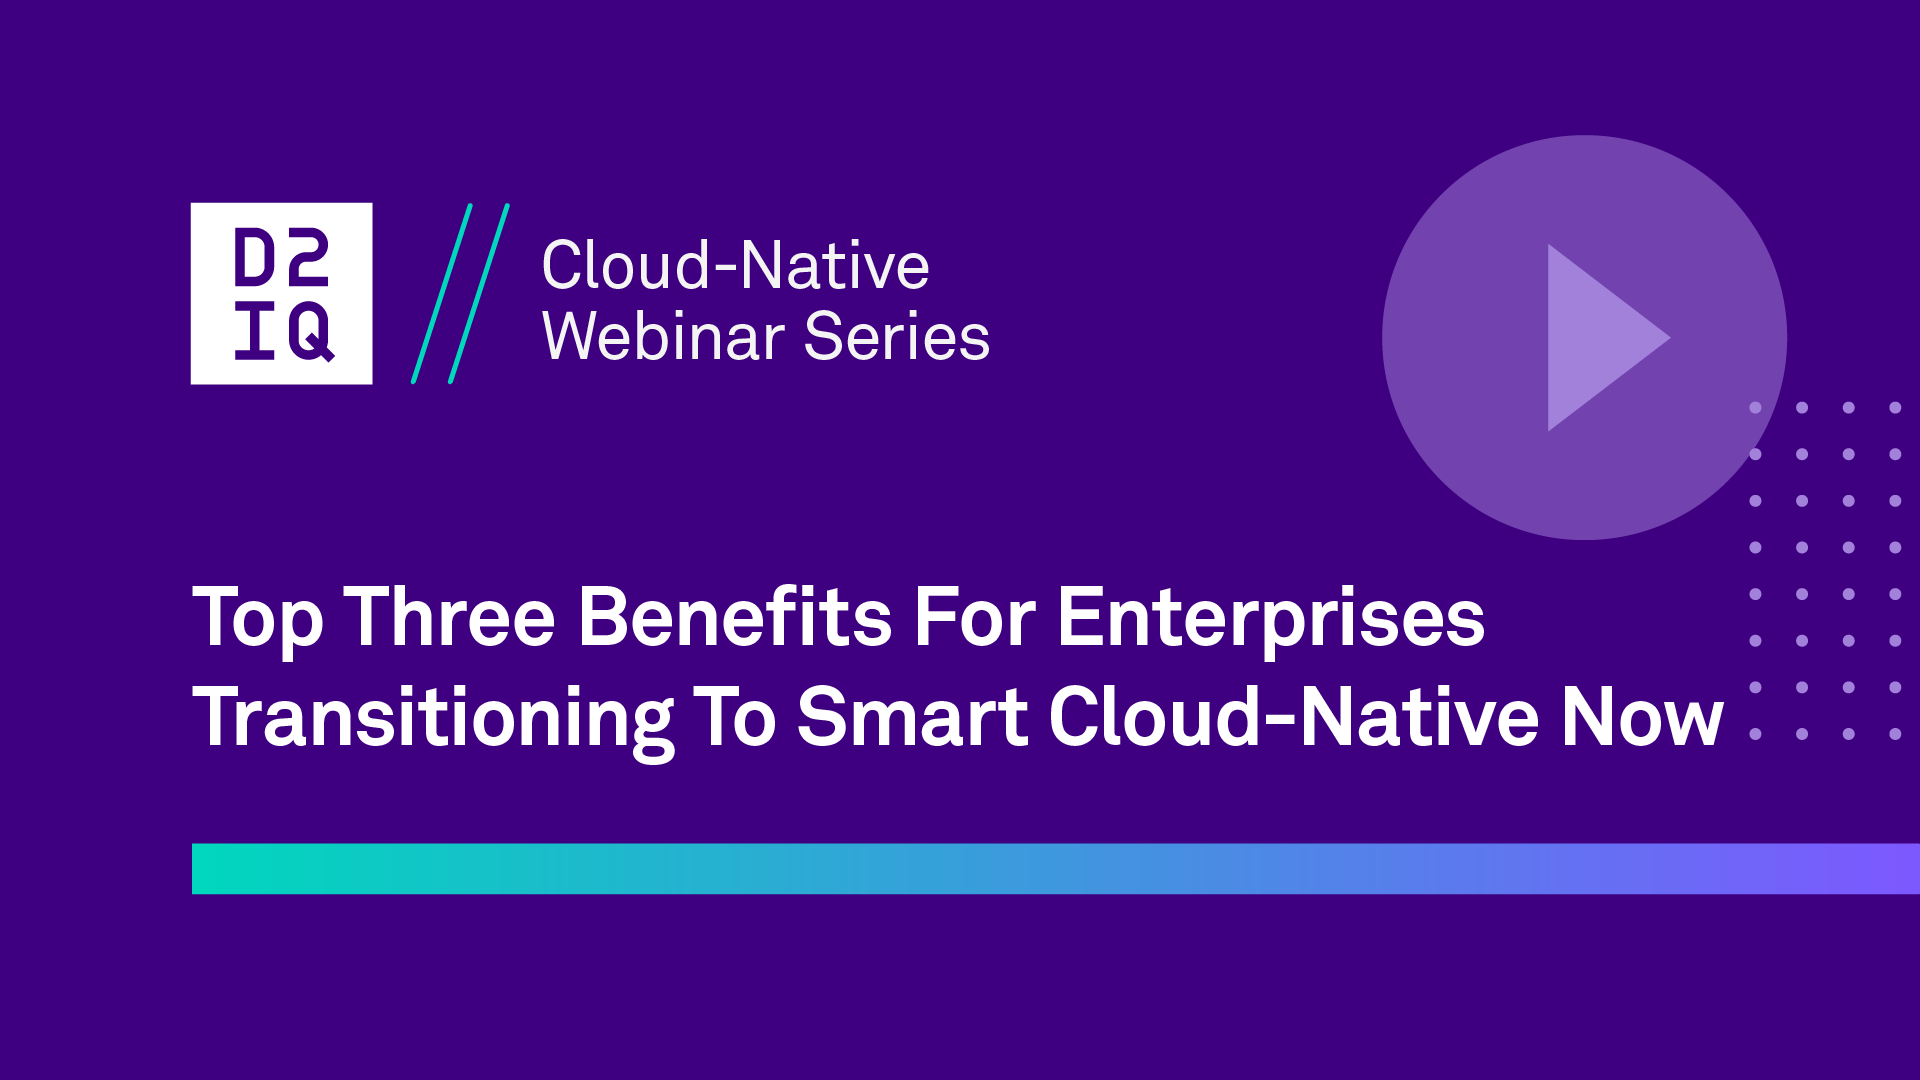 Top Three Benefits For Enterprises Transitioning To Smart Cloud-Native Now